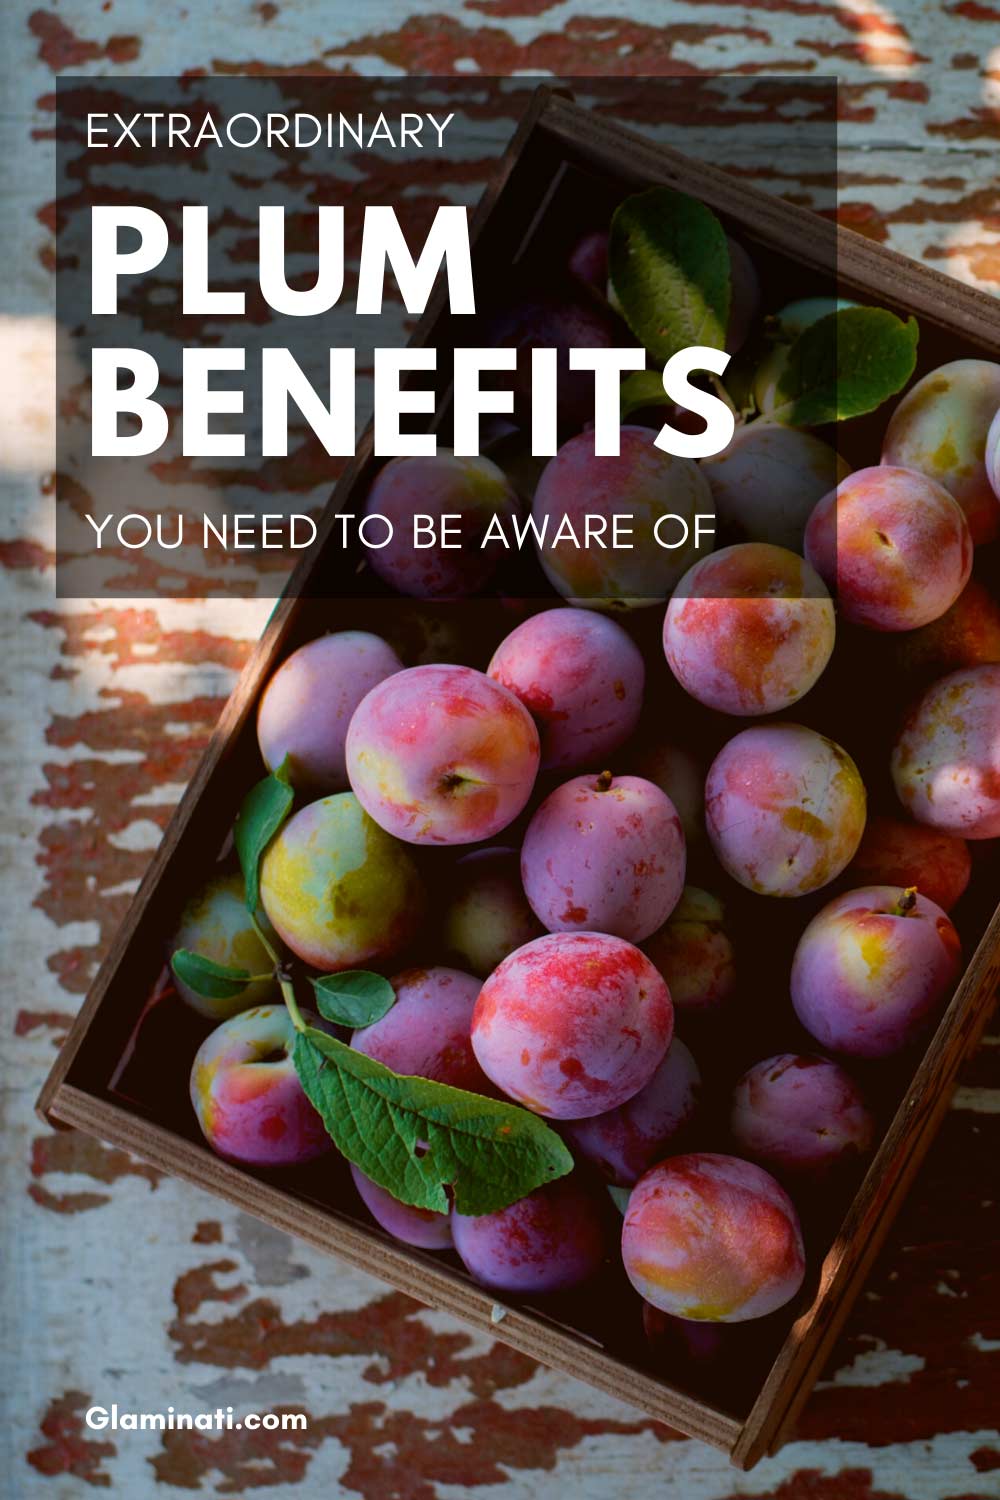 Exceptional Plum Benefits To Strengthen Your Health 3876